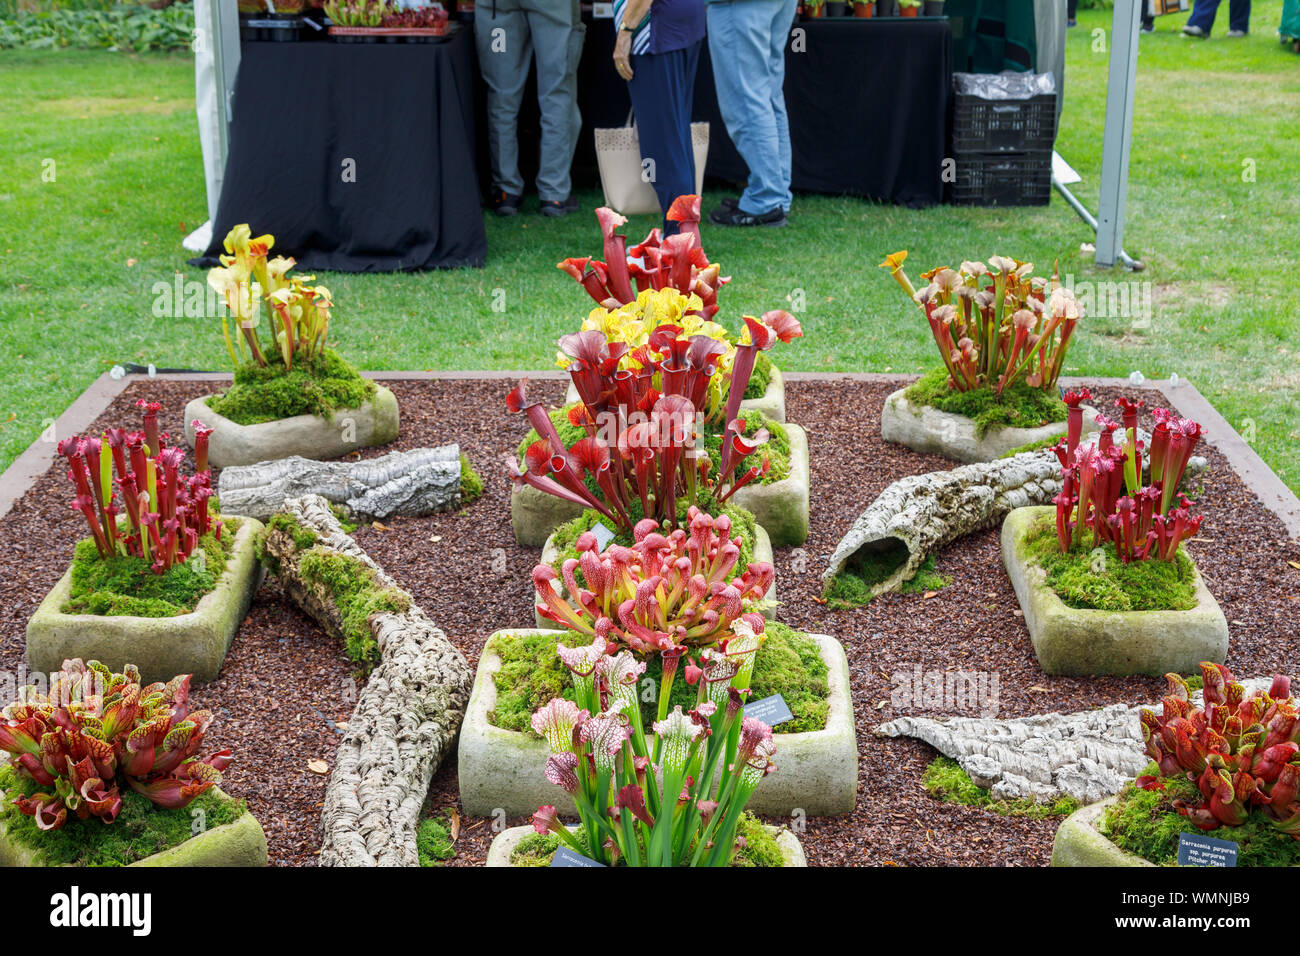 Display of carnivorous plants at the September 2019 Wisley Garden Flower Show at RHS Garden Wisley, Surrey, south-east England Stock Photo